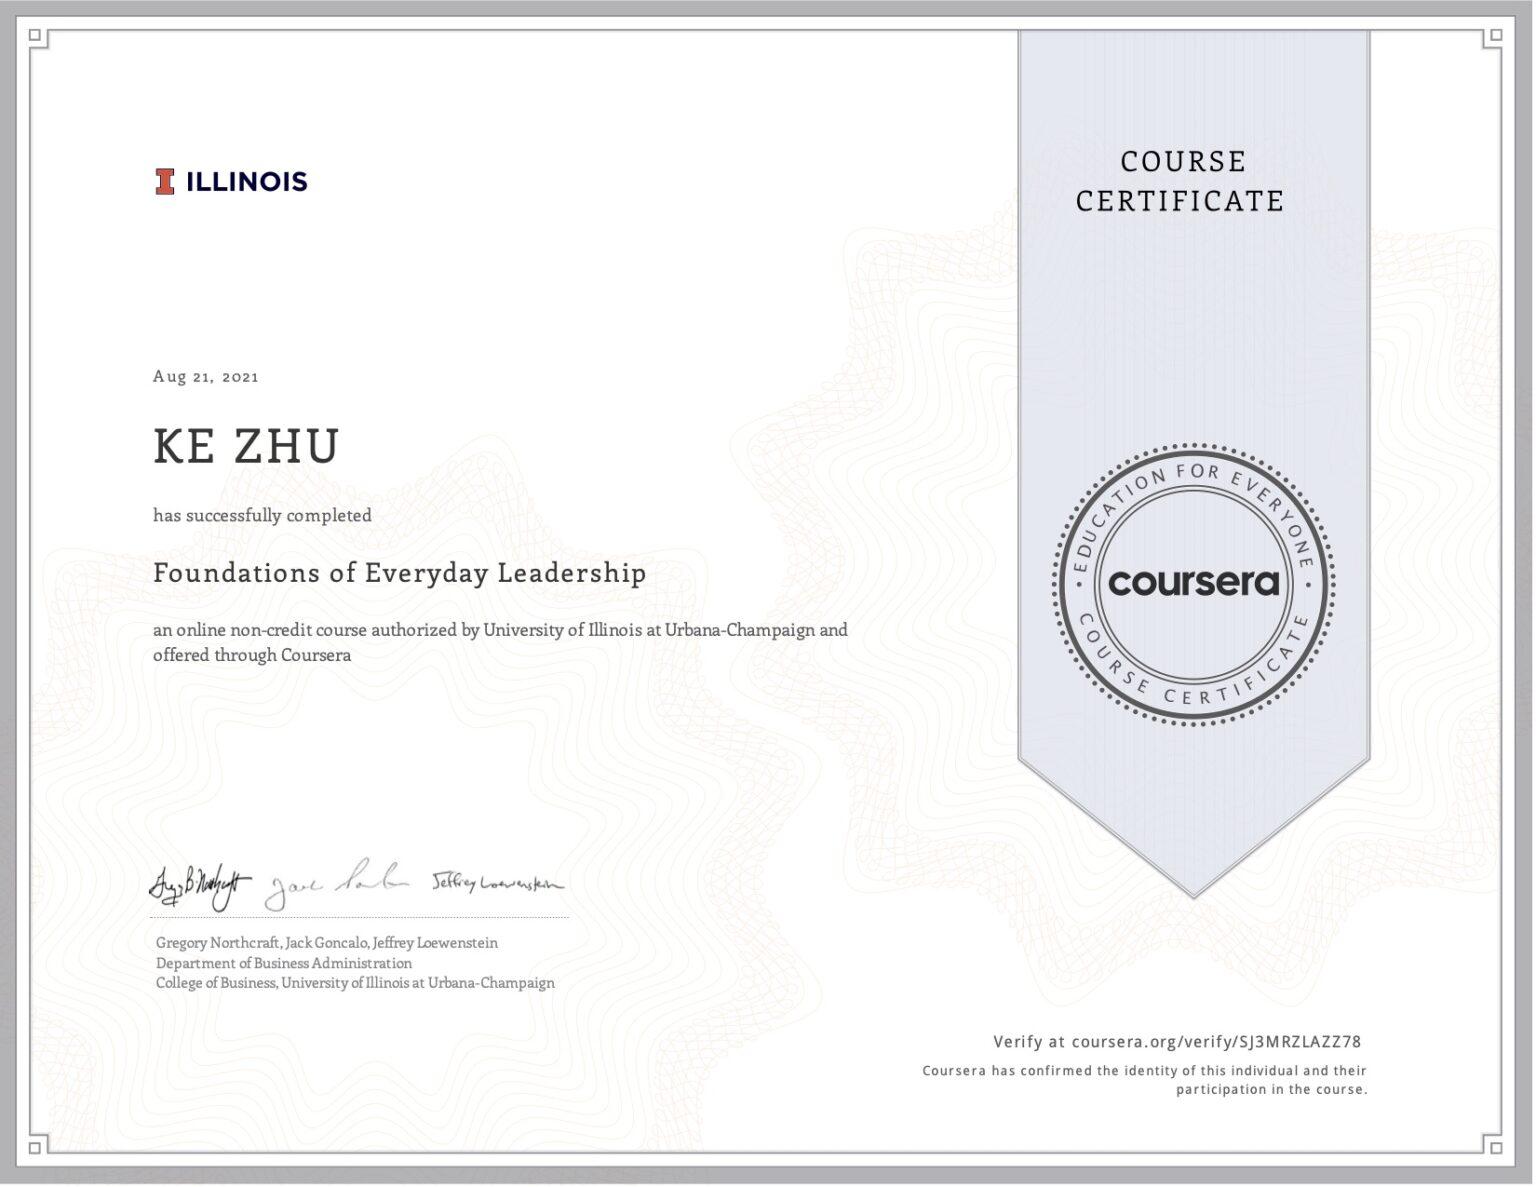 Foundations of Everyday Leadership 🦄 My #65 course certificate from